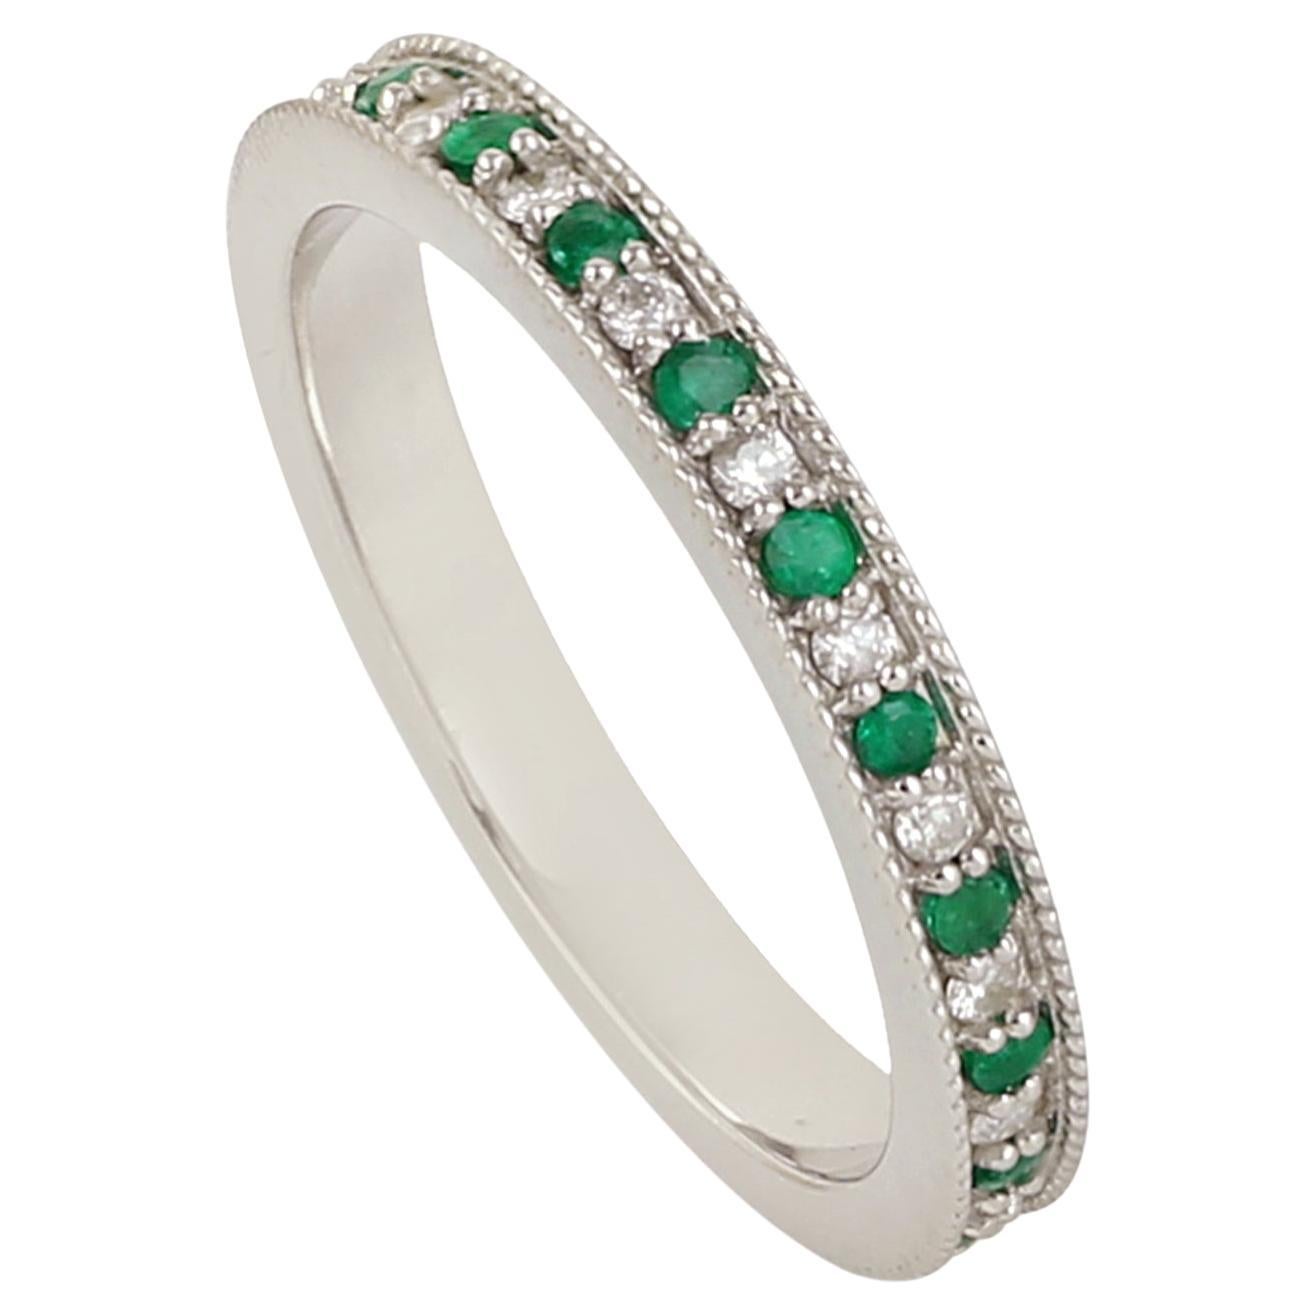 Pave Diamond & Emerald Channel Set Band Ring Made In 14K White Gold For Sale